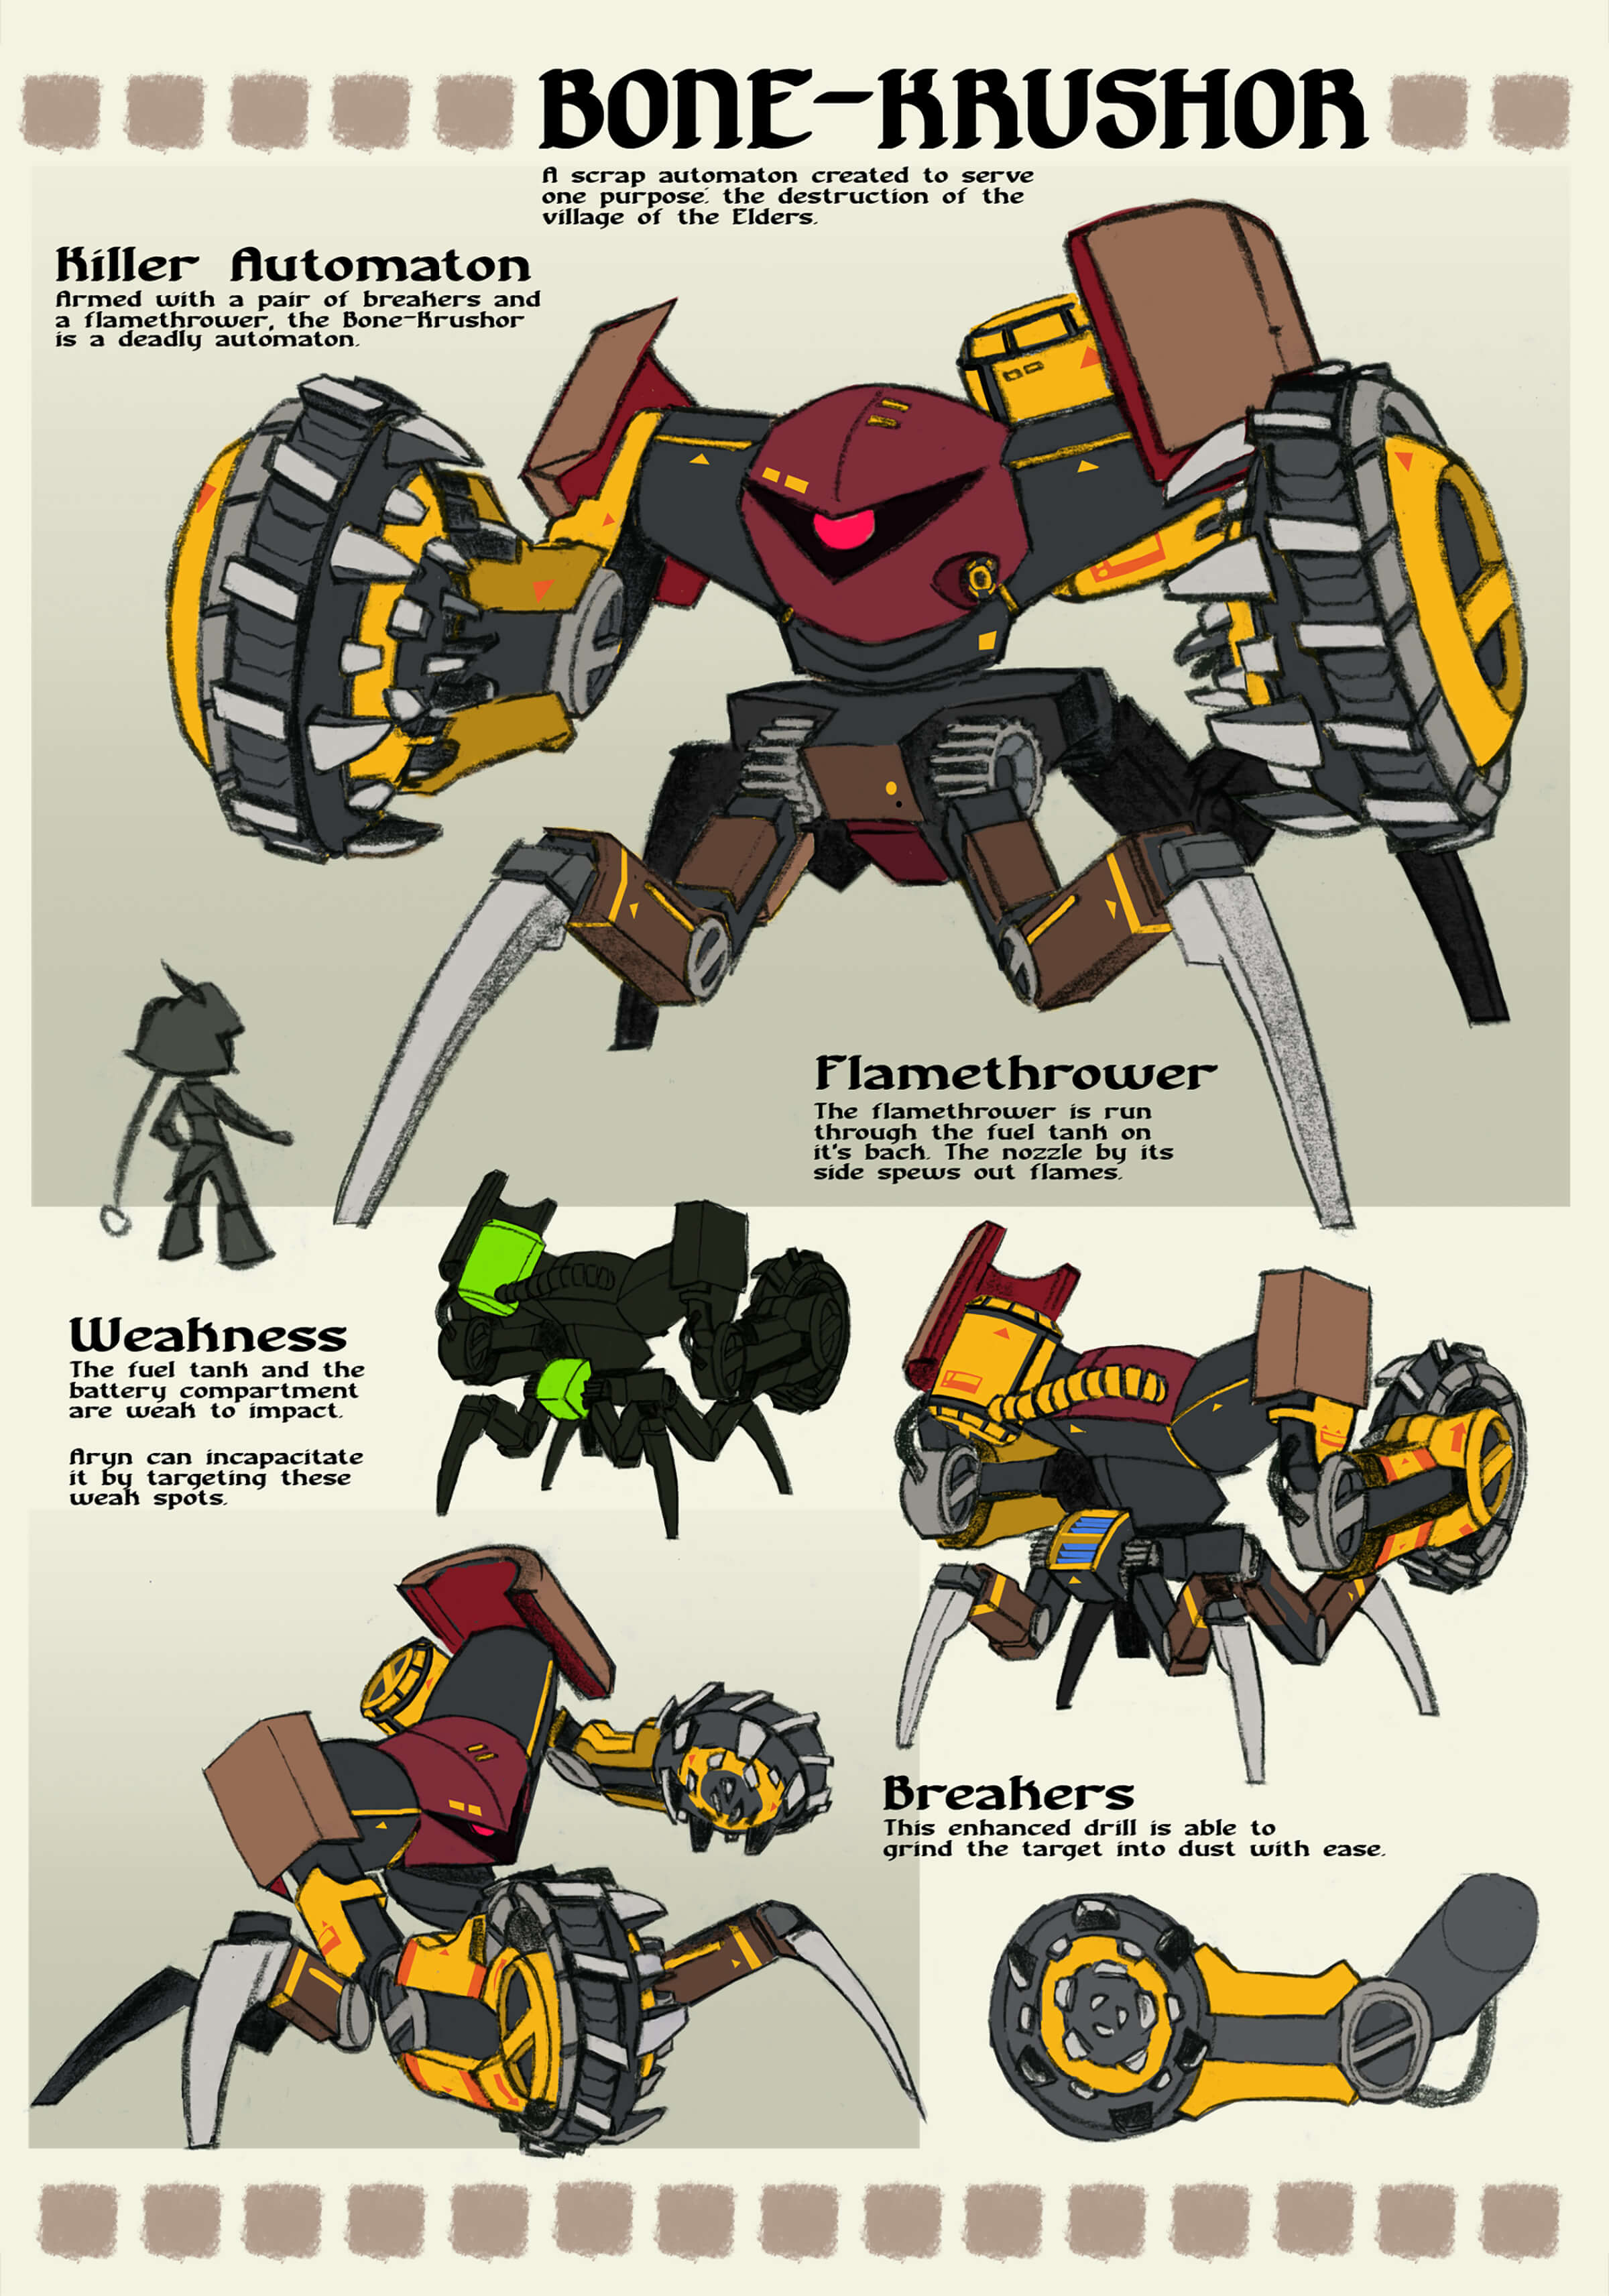 Concept art and details of a large quadrupedal robot with a single red eye and grinding wheel-like fists.